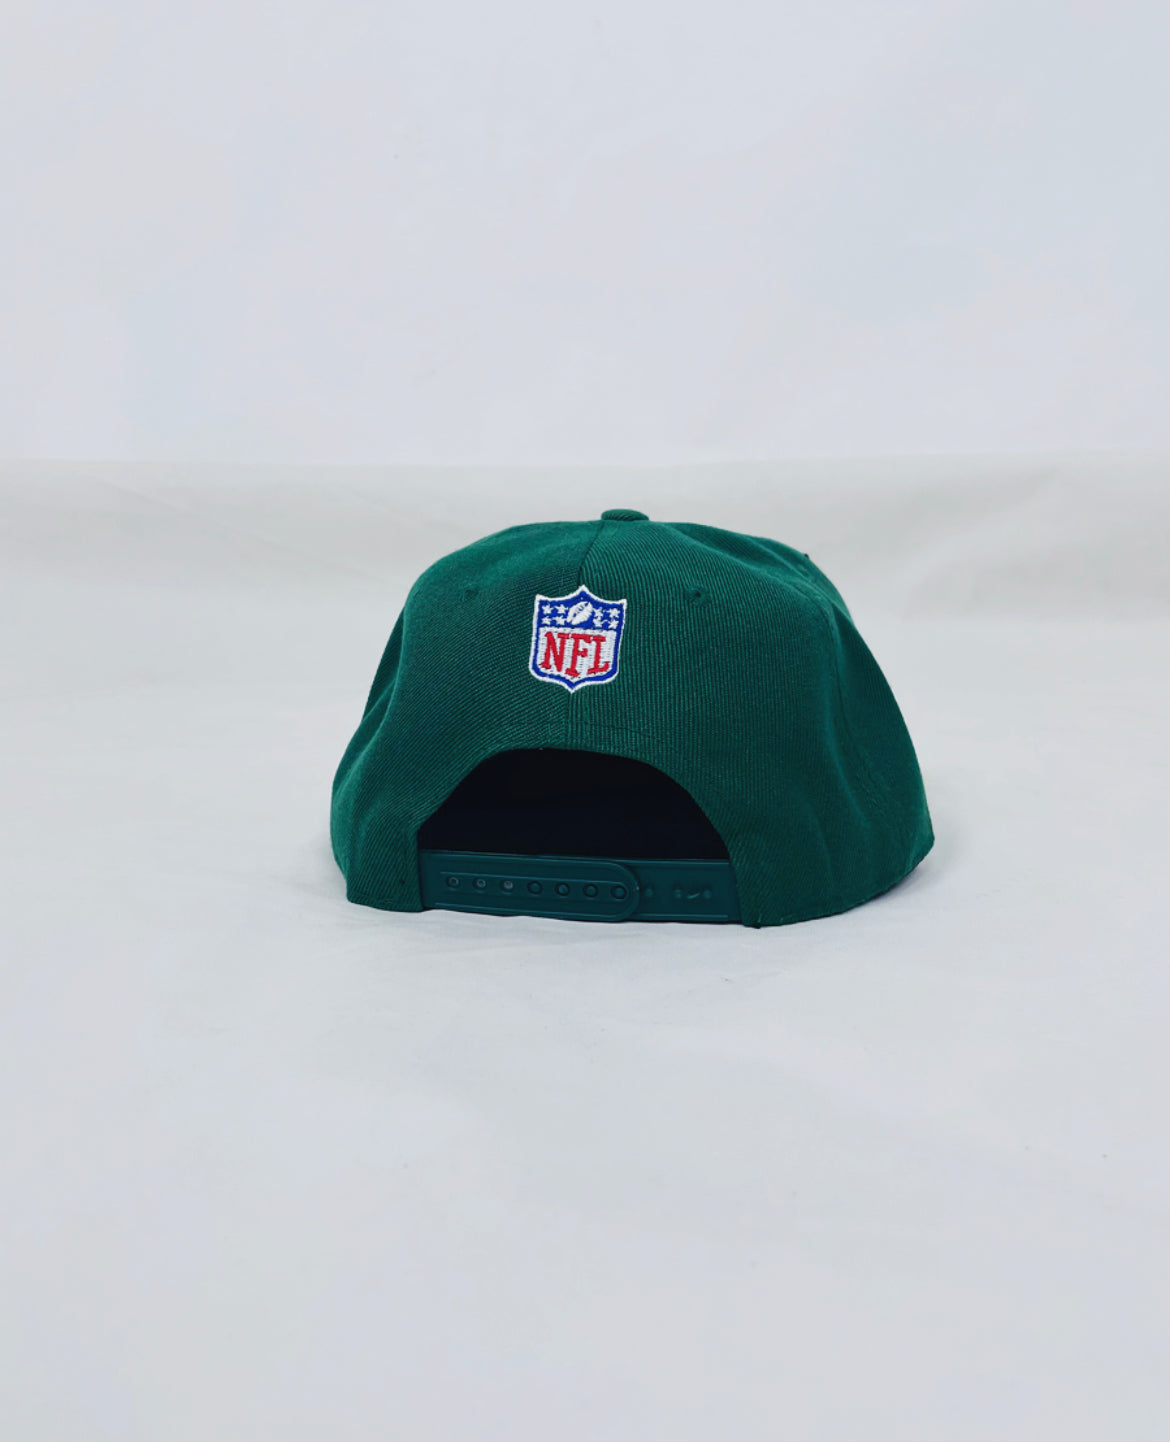 Eagles cap with green background